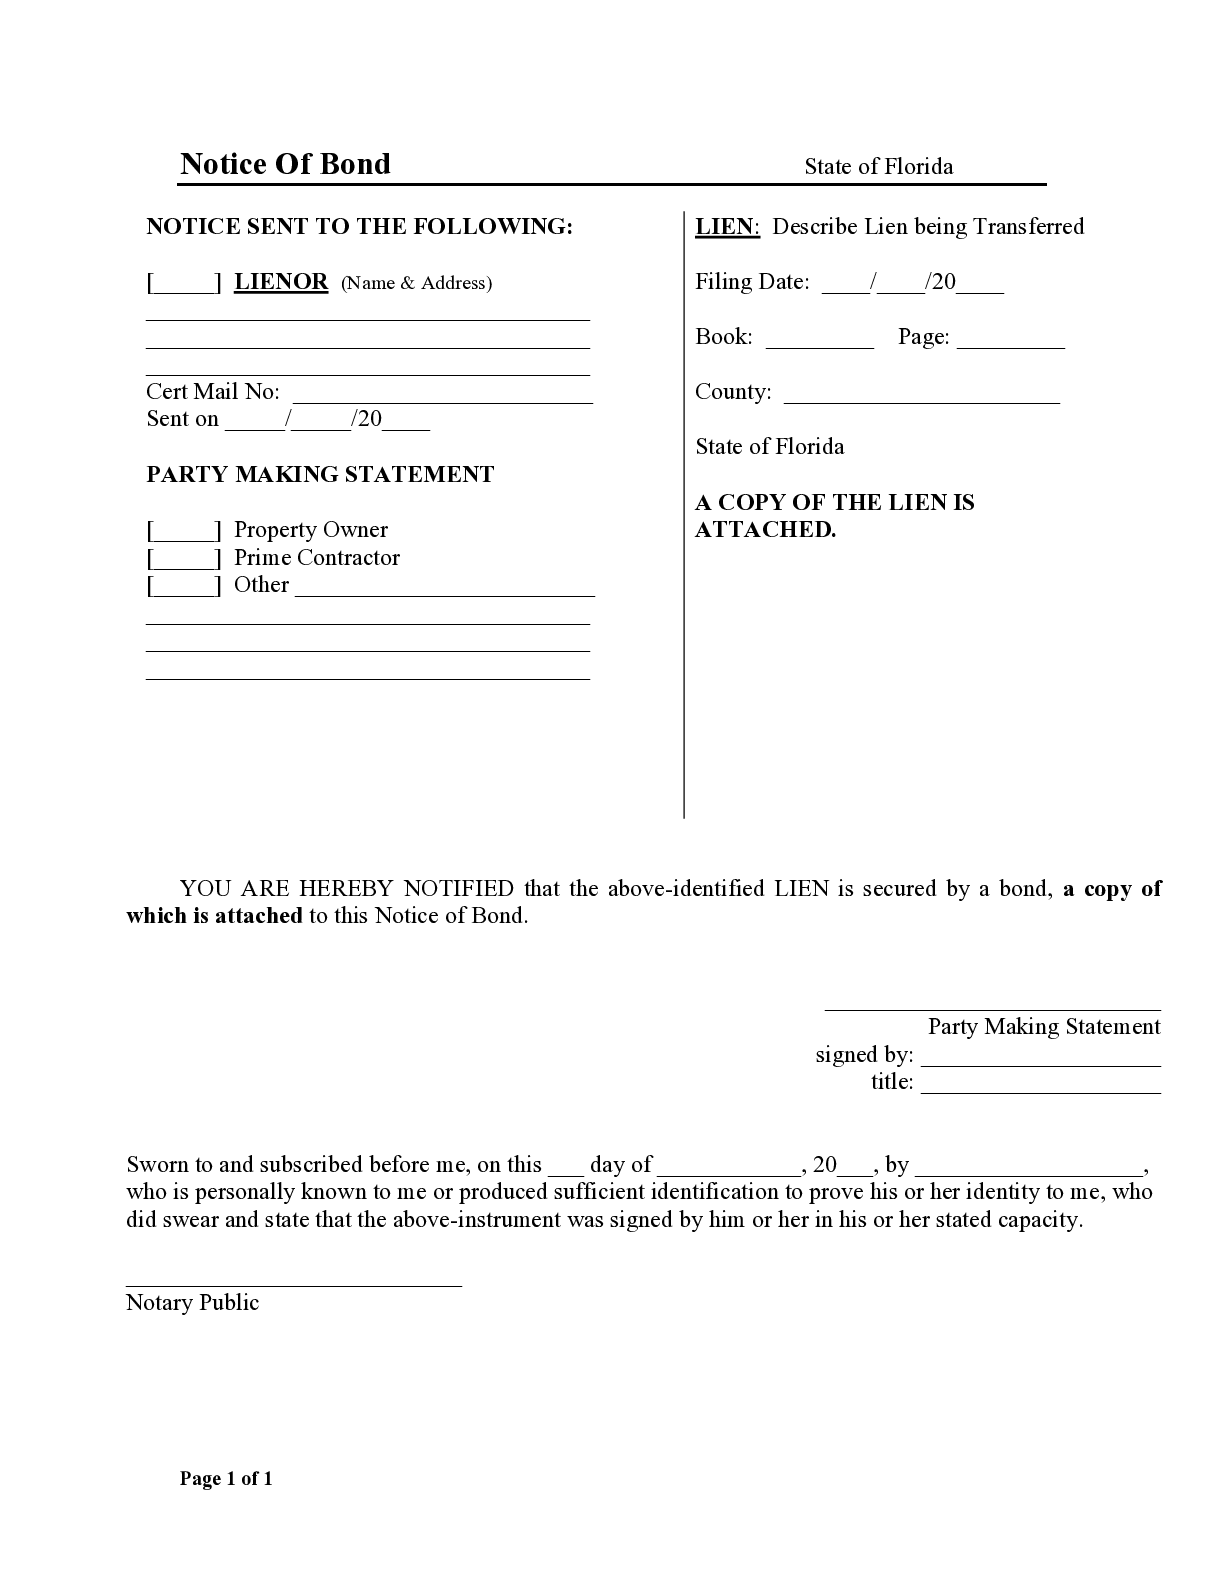 Florida Notice of Bond Form - free from